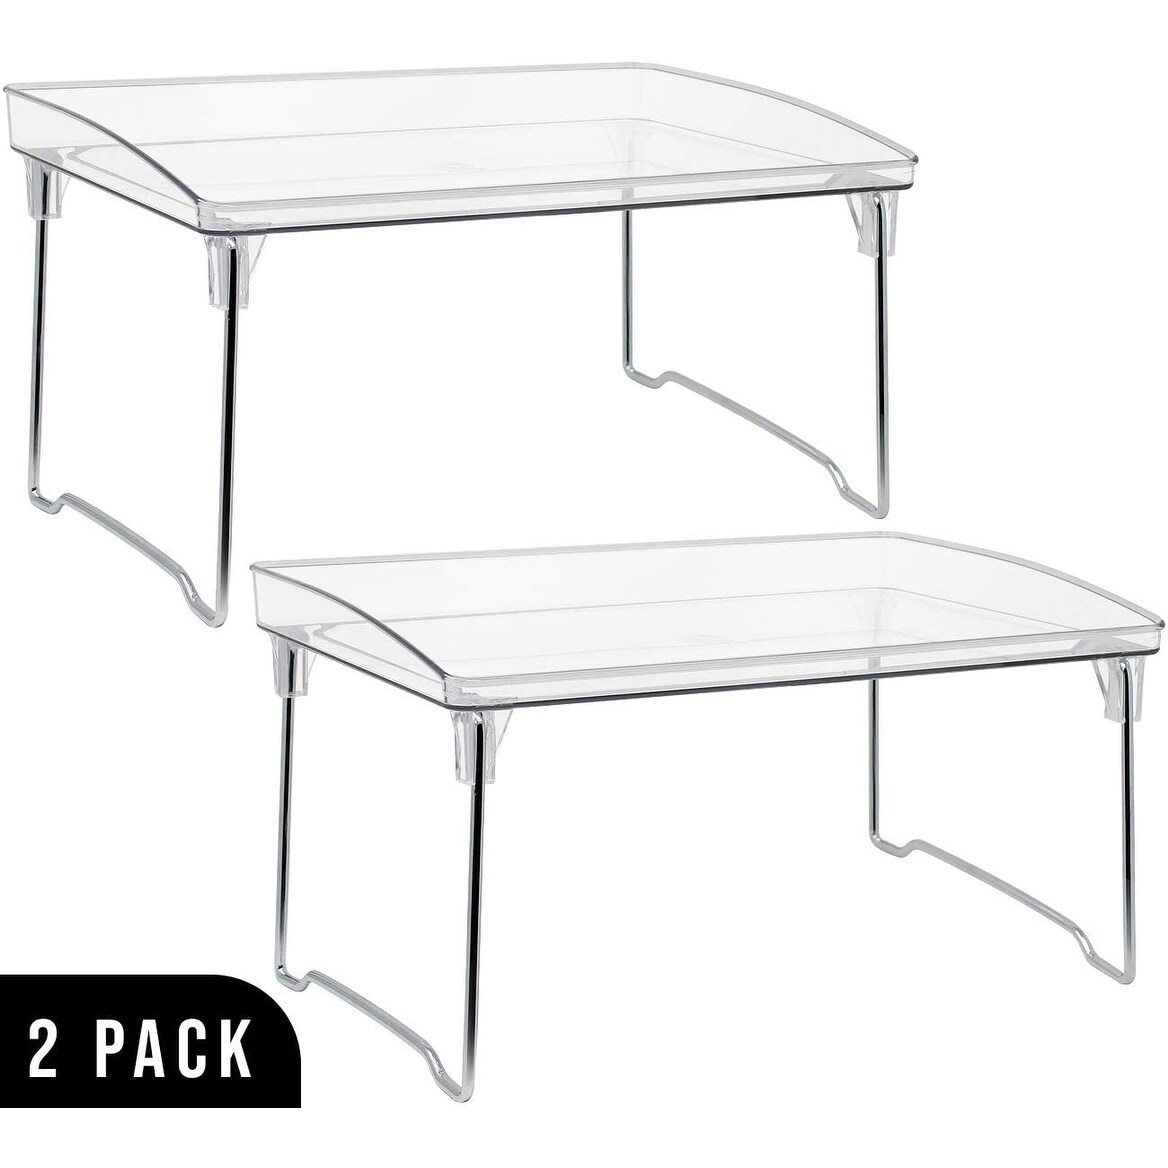 https://ak1.ostkcdn.com/images/products/is/images/direct/ef6760baf47a53cbb24055dee7f4c4c0a219c1d5/2-Tier-Stackable-Storage-Shelf-Stand--Foldable-Organizer-Rack-for-Kitchen-Pantry.jpg